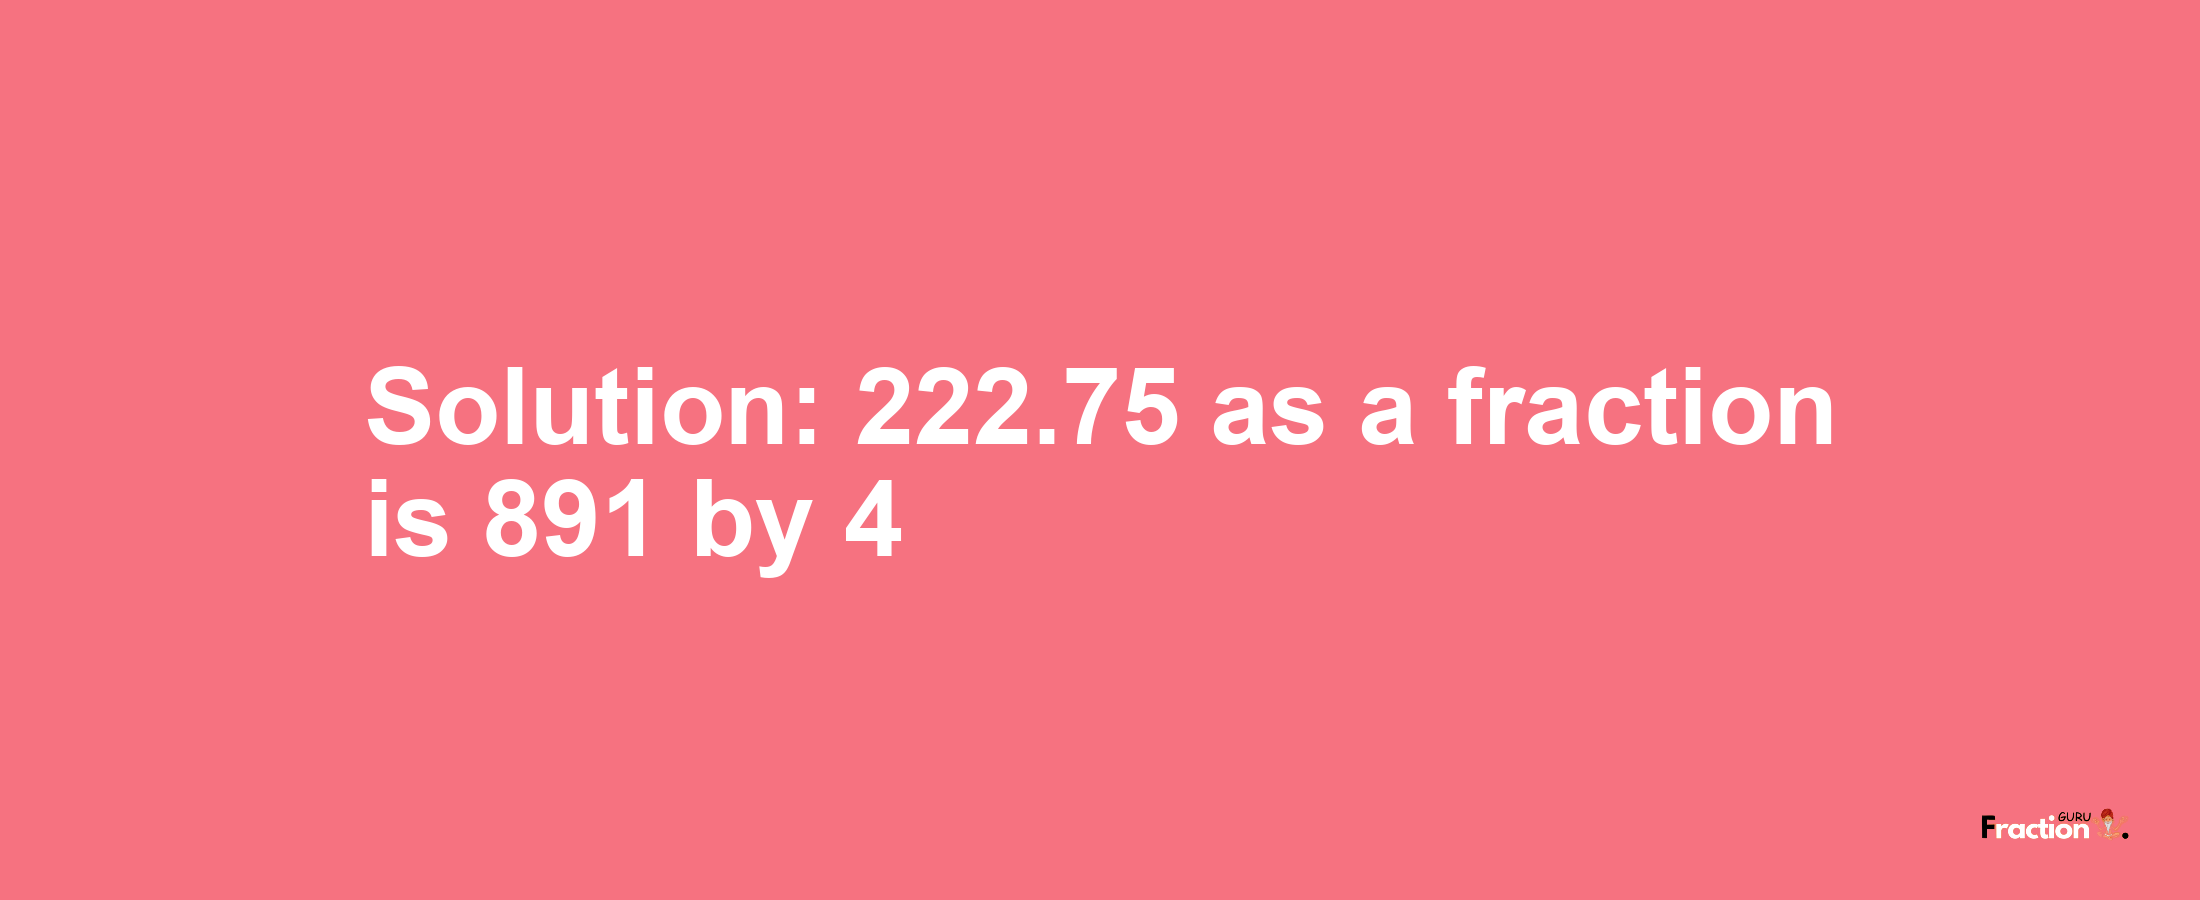 Solution:222.75 as a fraction is 891/4